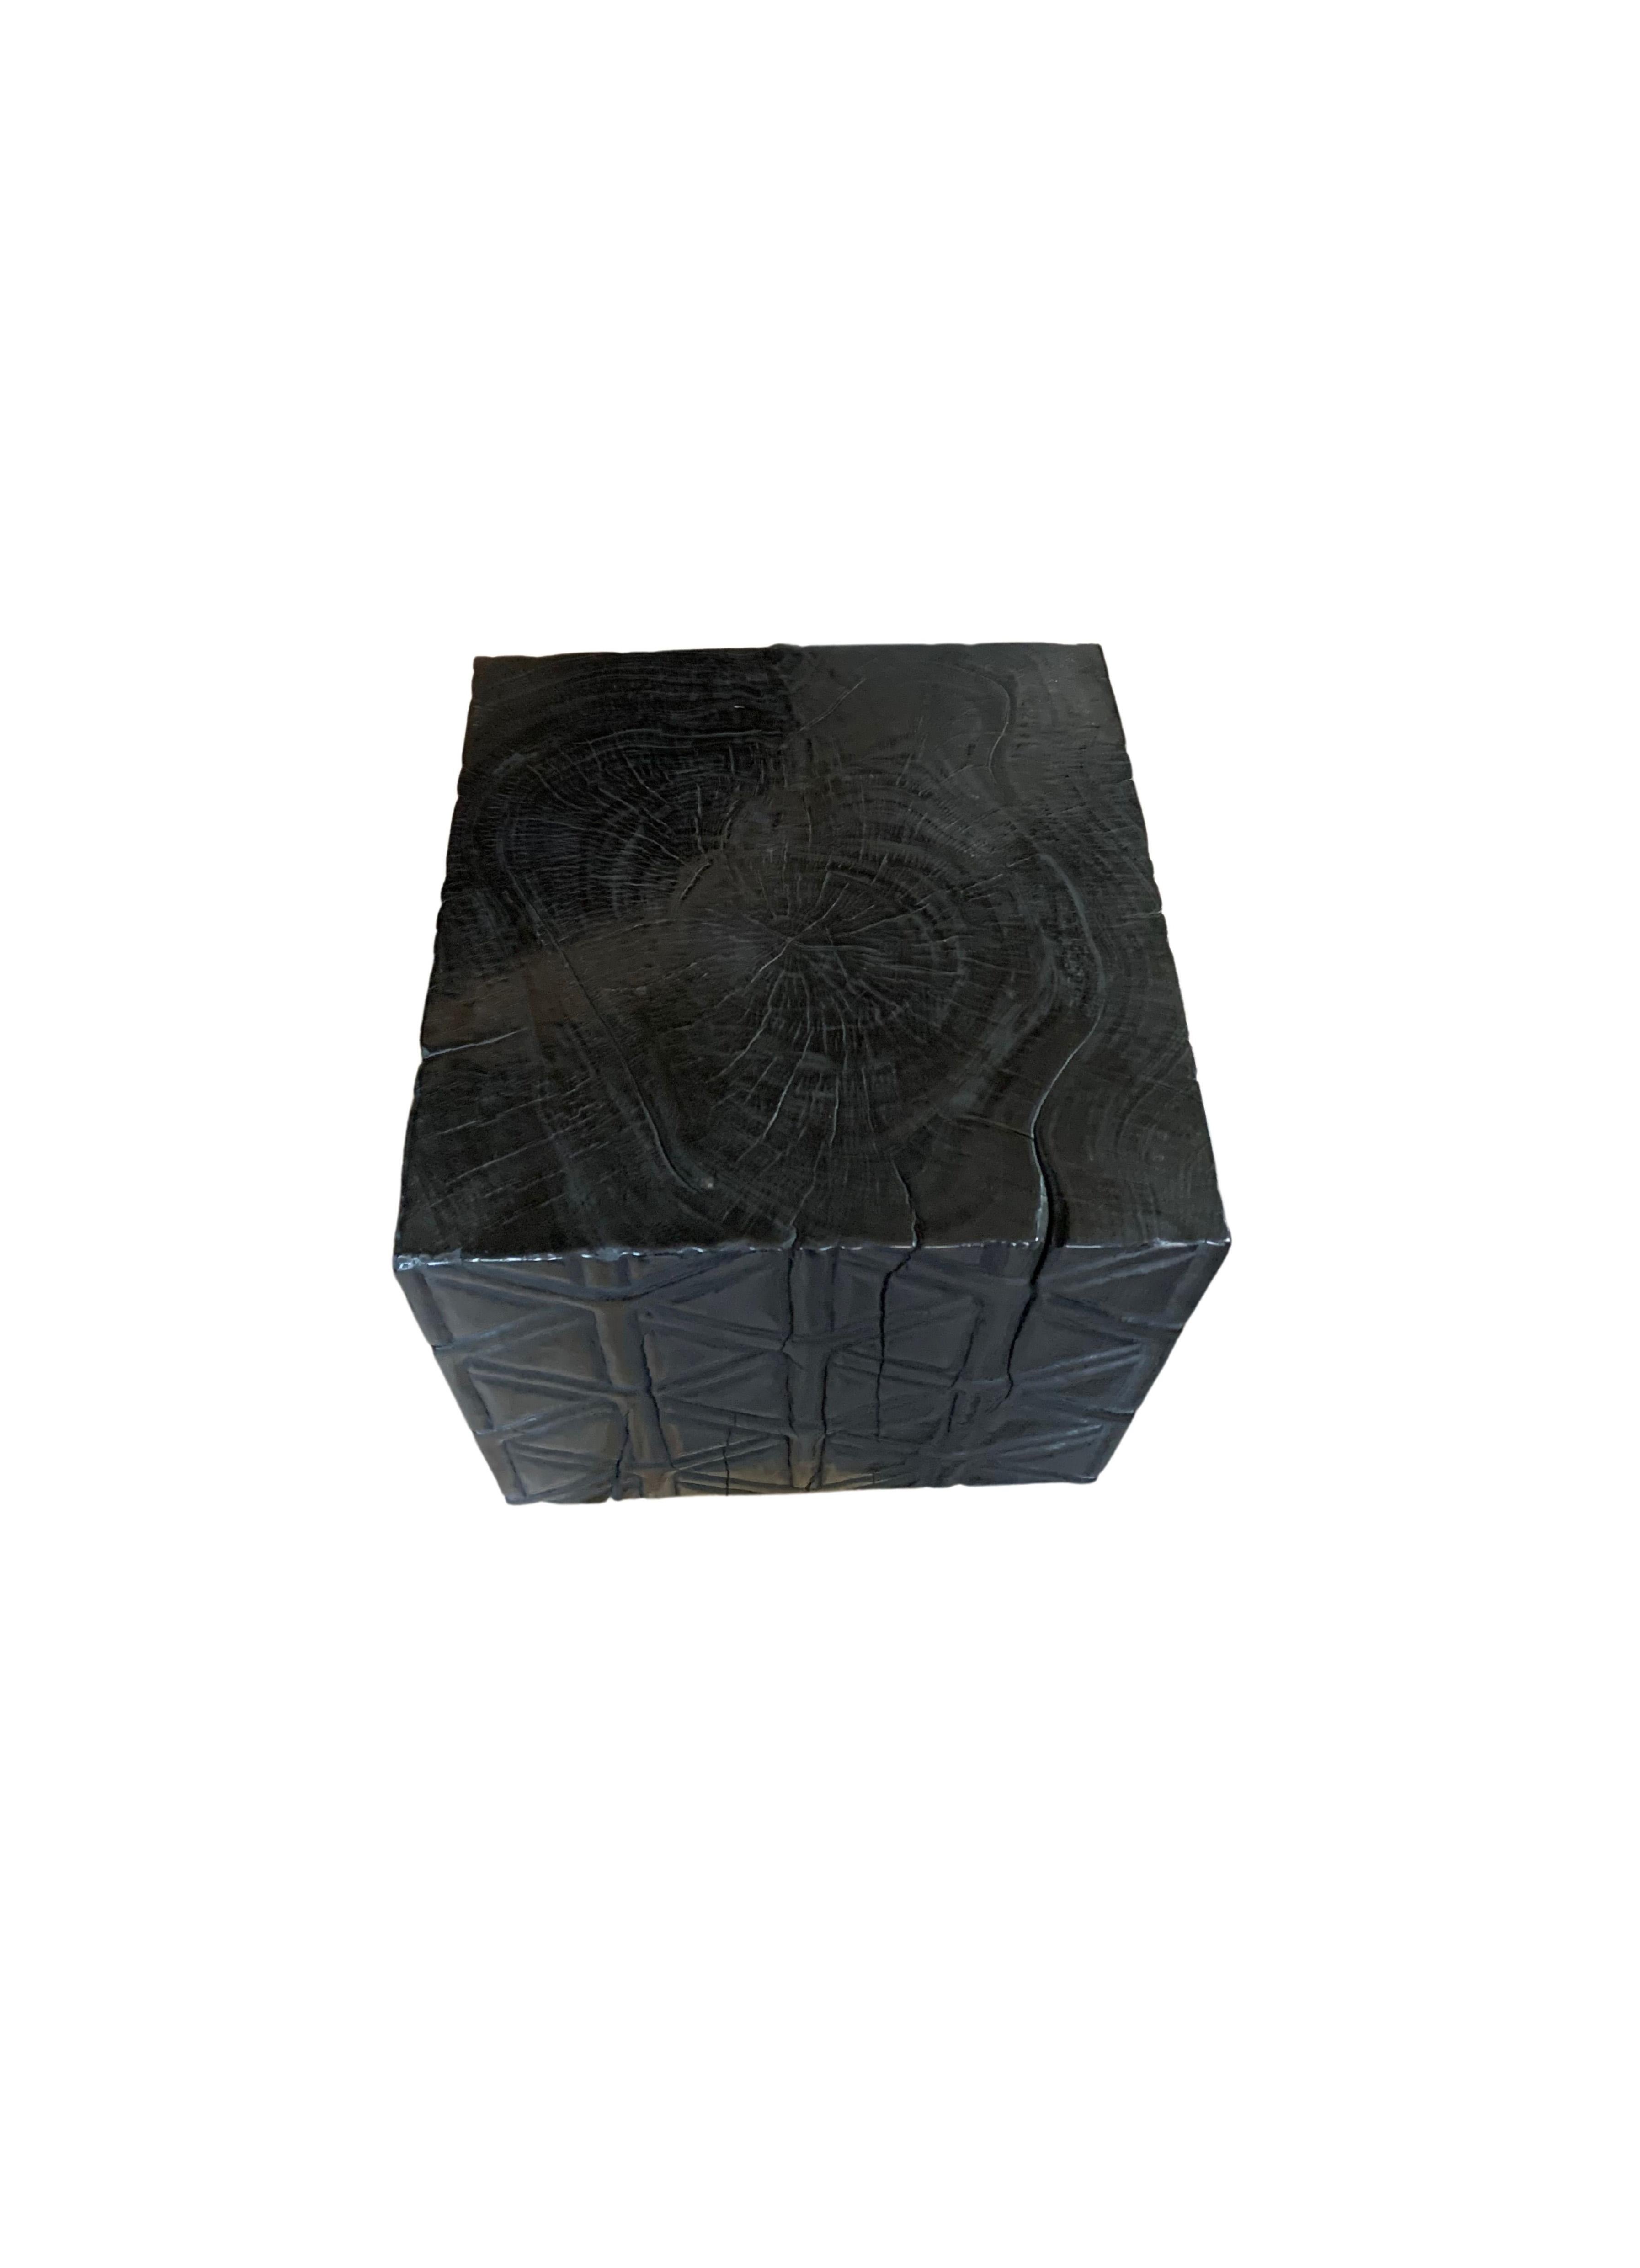 Hand-Crafted Sculptural Side Table Crafted from Mango Wood For Sale